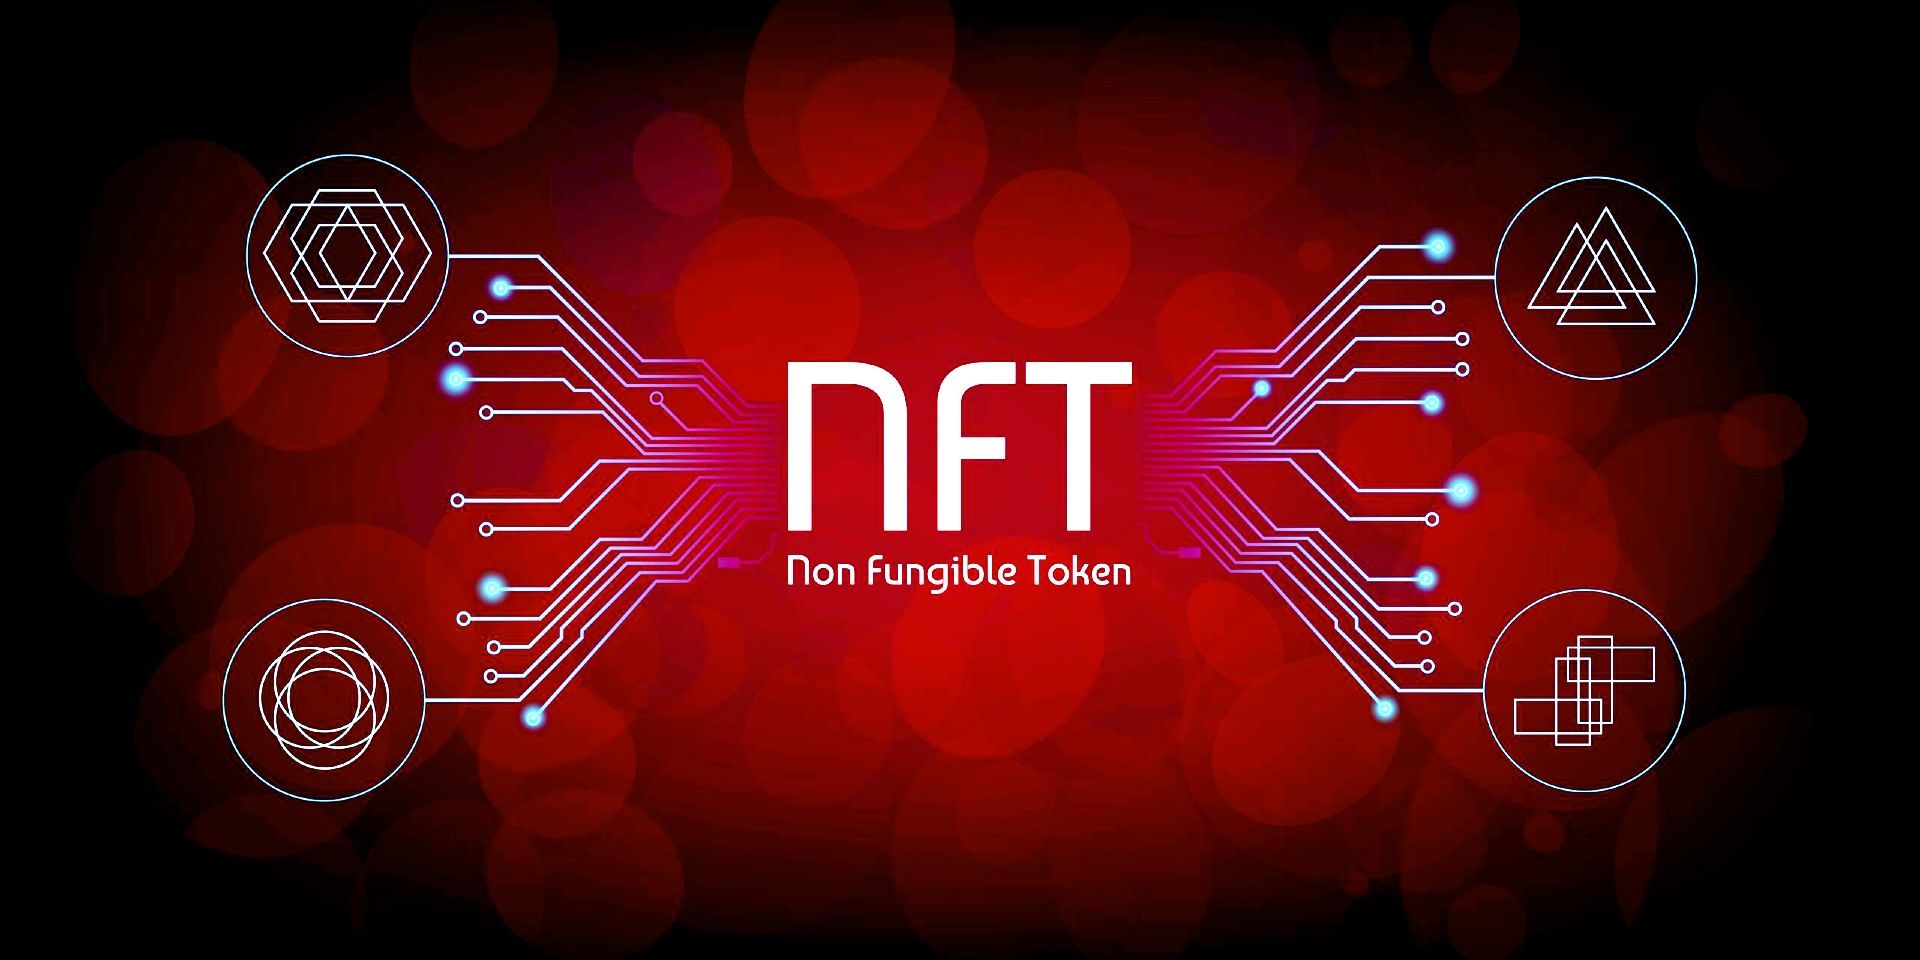 NFT digital art on red background with circuit lines connecting to symbols